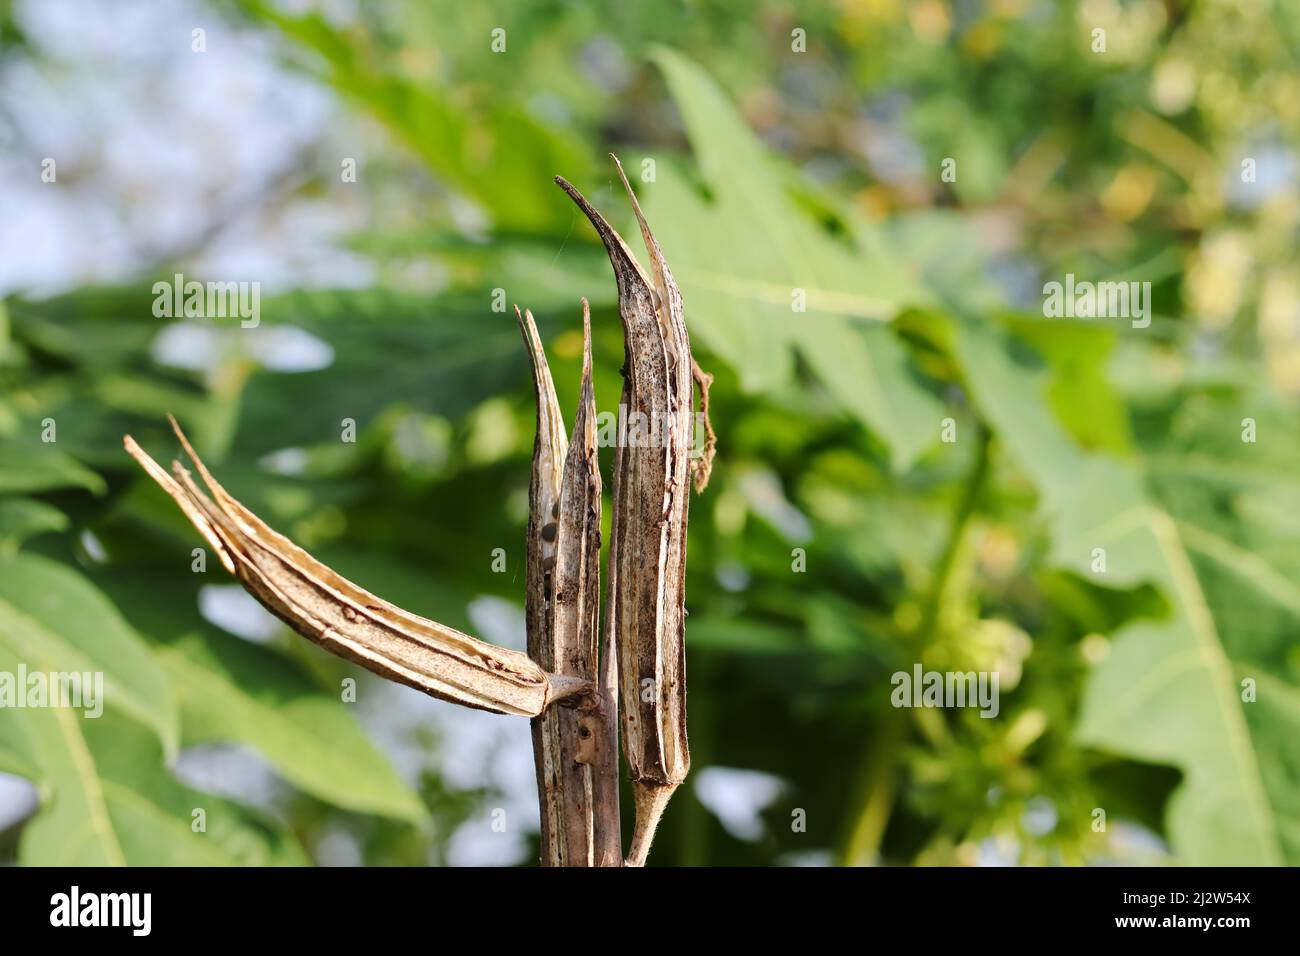 Close-up photo of dried okra fruit or vegetable in field Stock Photo